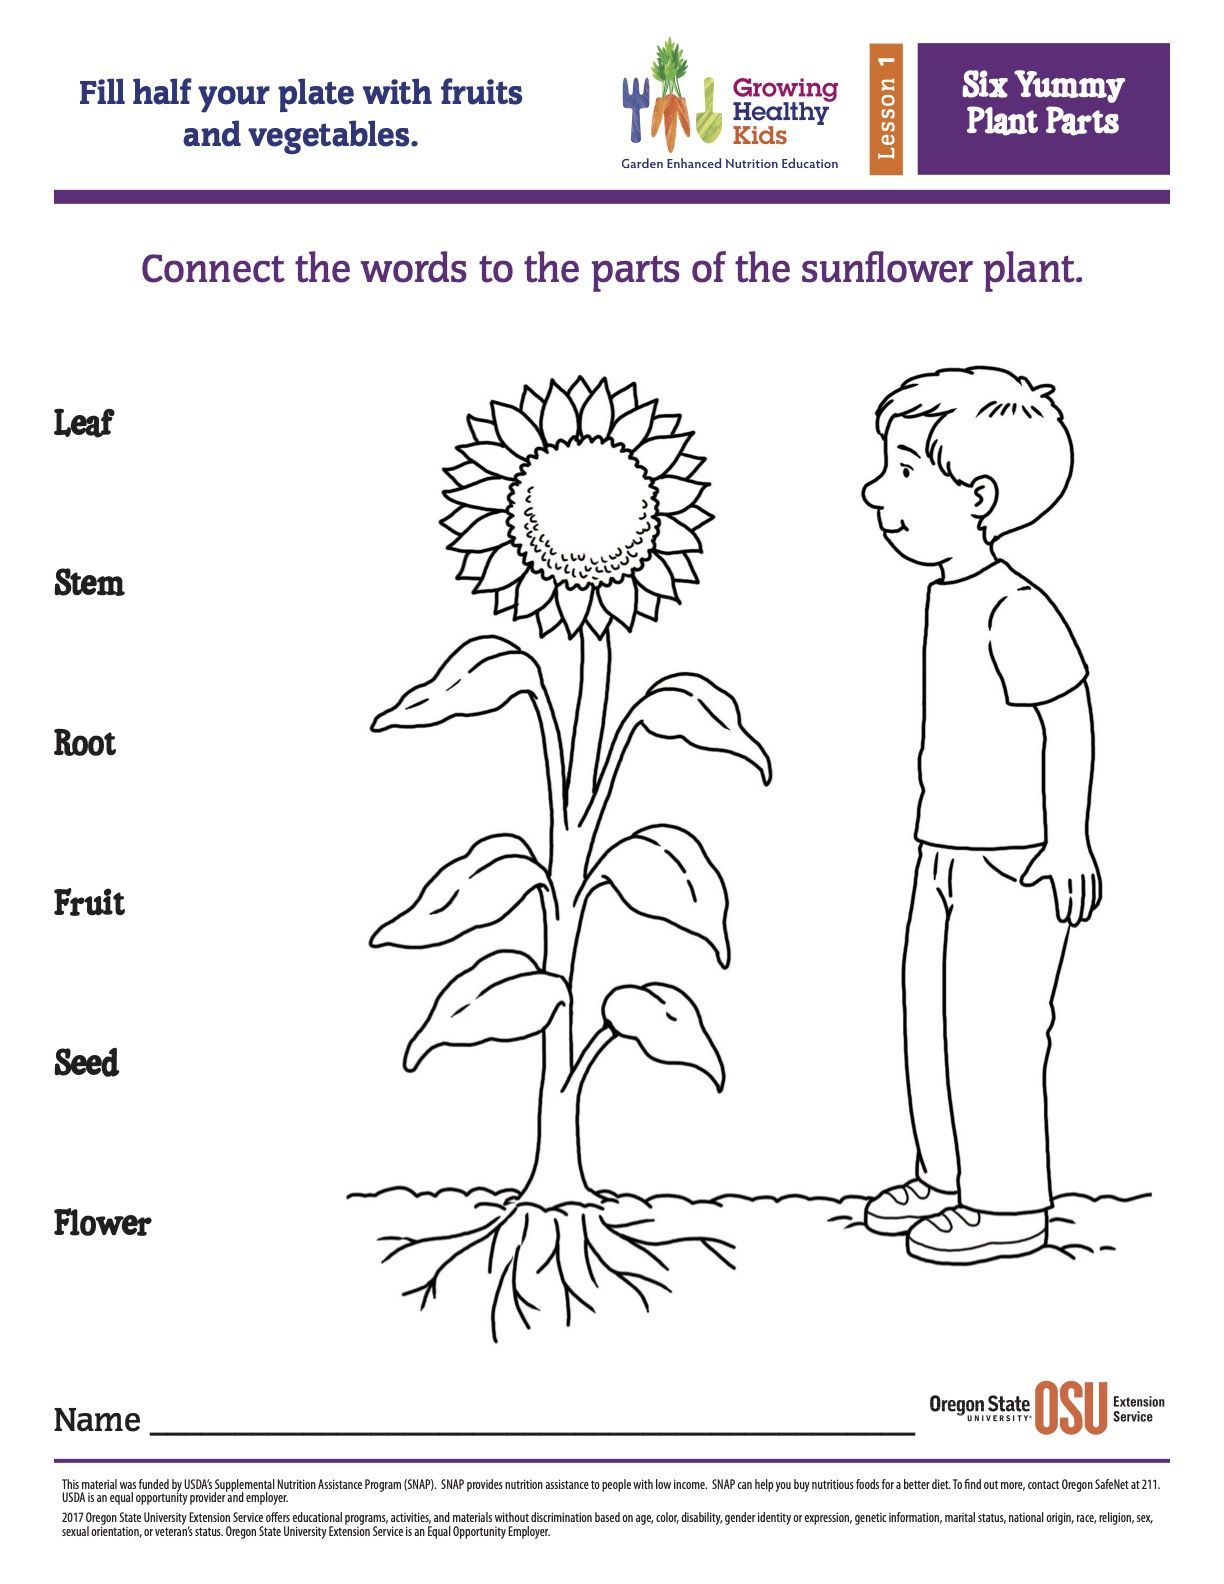 Six yummy plant parts parts of a plant color activities coloring sheets